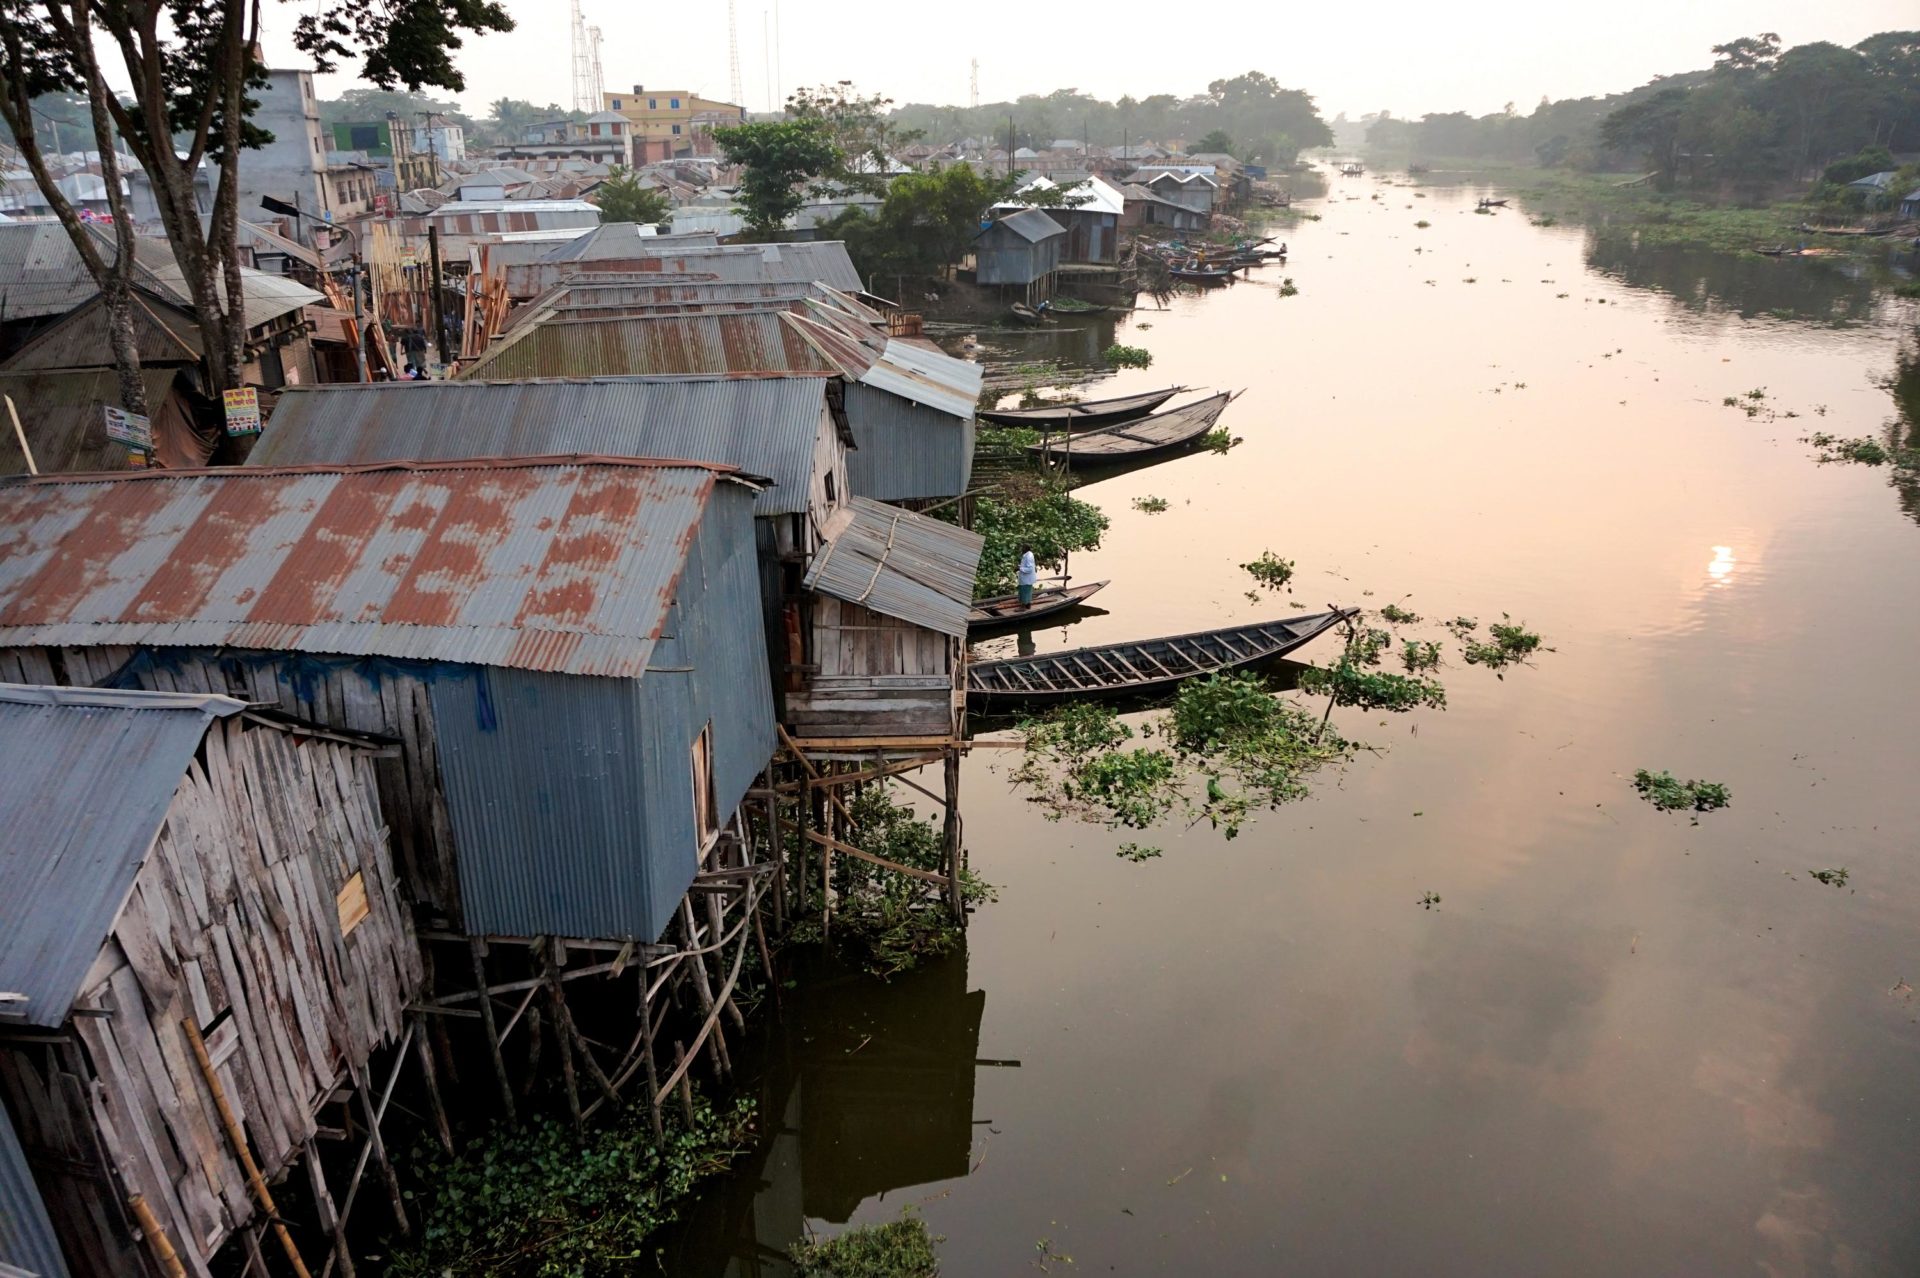 Riverside houses in Kotalipara, Bangladesh, are built on stilts to keep them out of reach of monsoon flooding. Photo by Josiah Neufeld